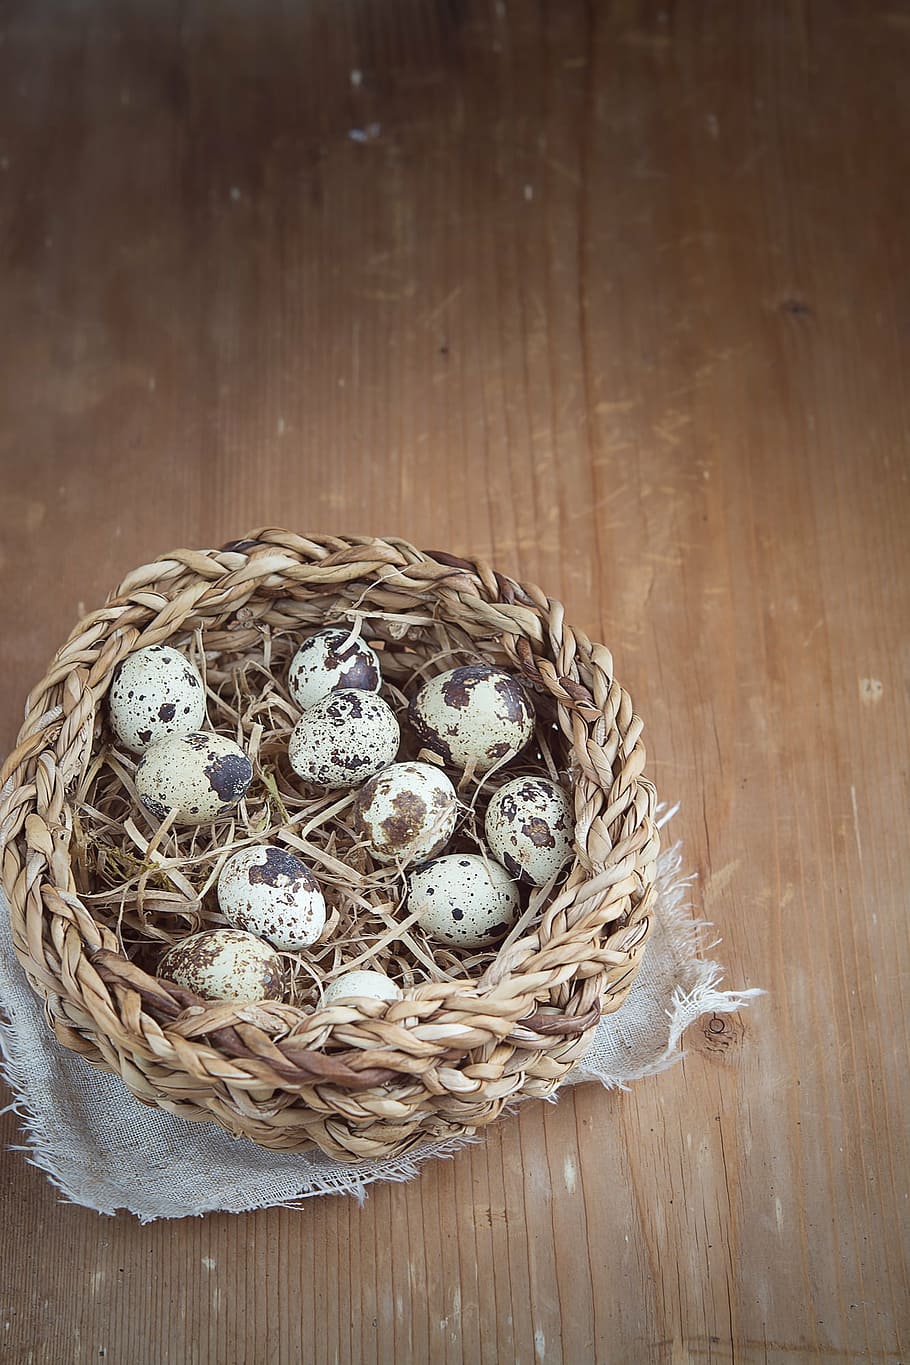 egg, quail eggs, basket, small eggs, natural product, easter, wood, close, text dom, negative space